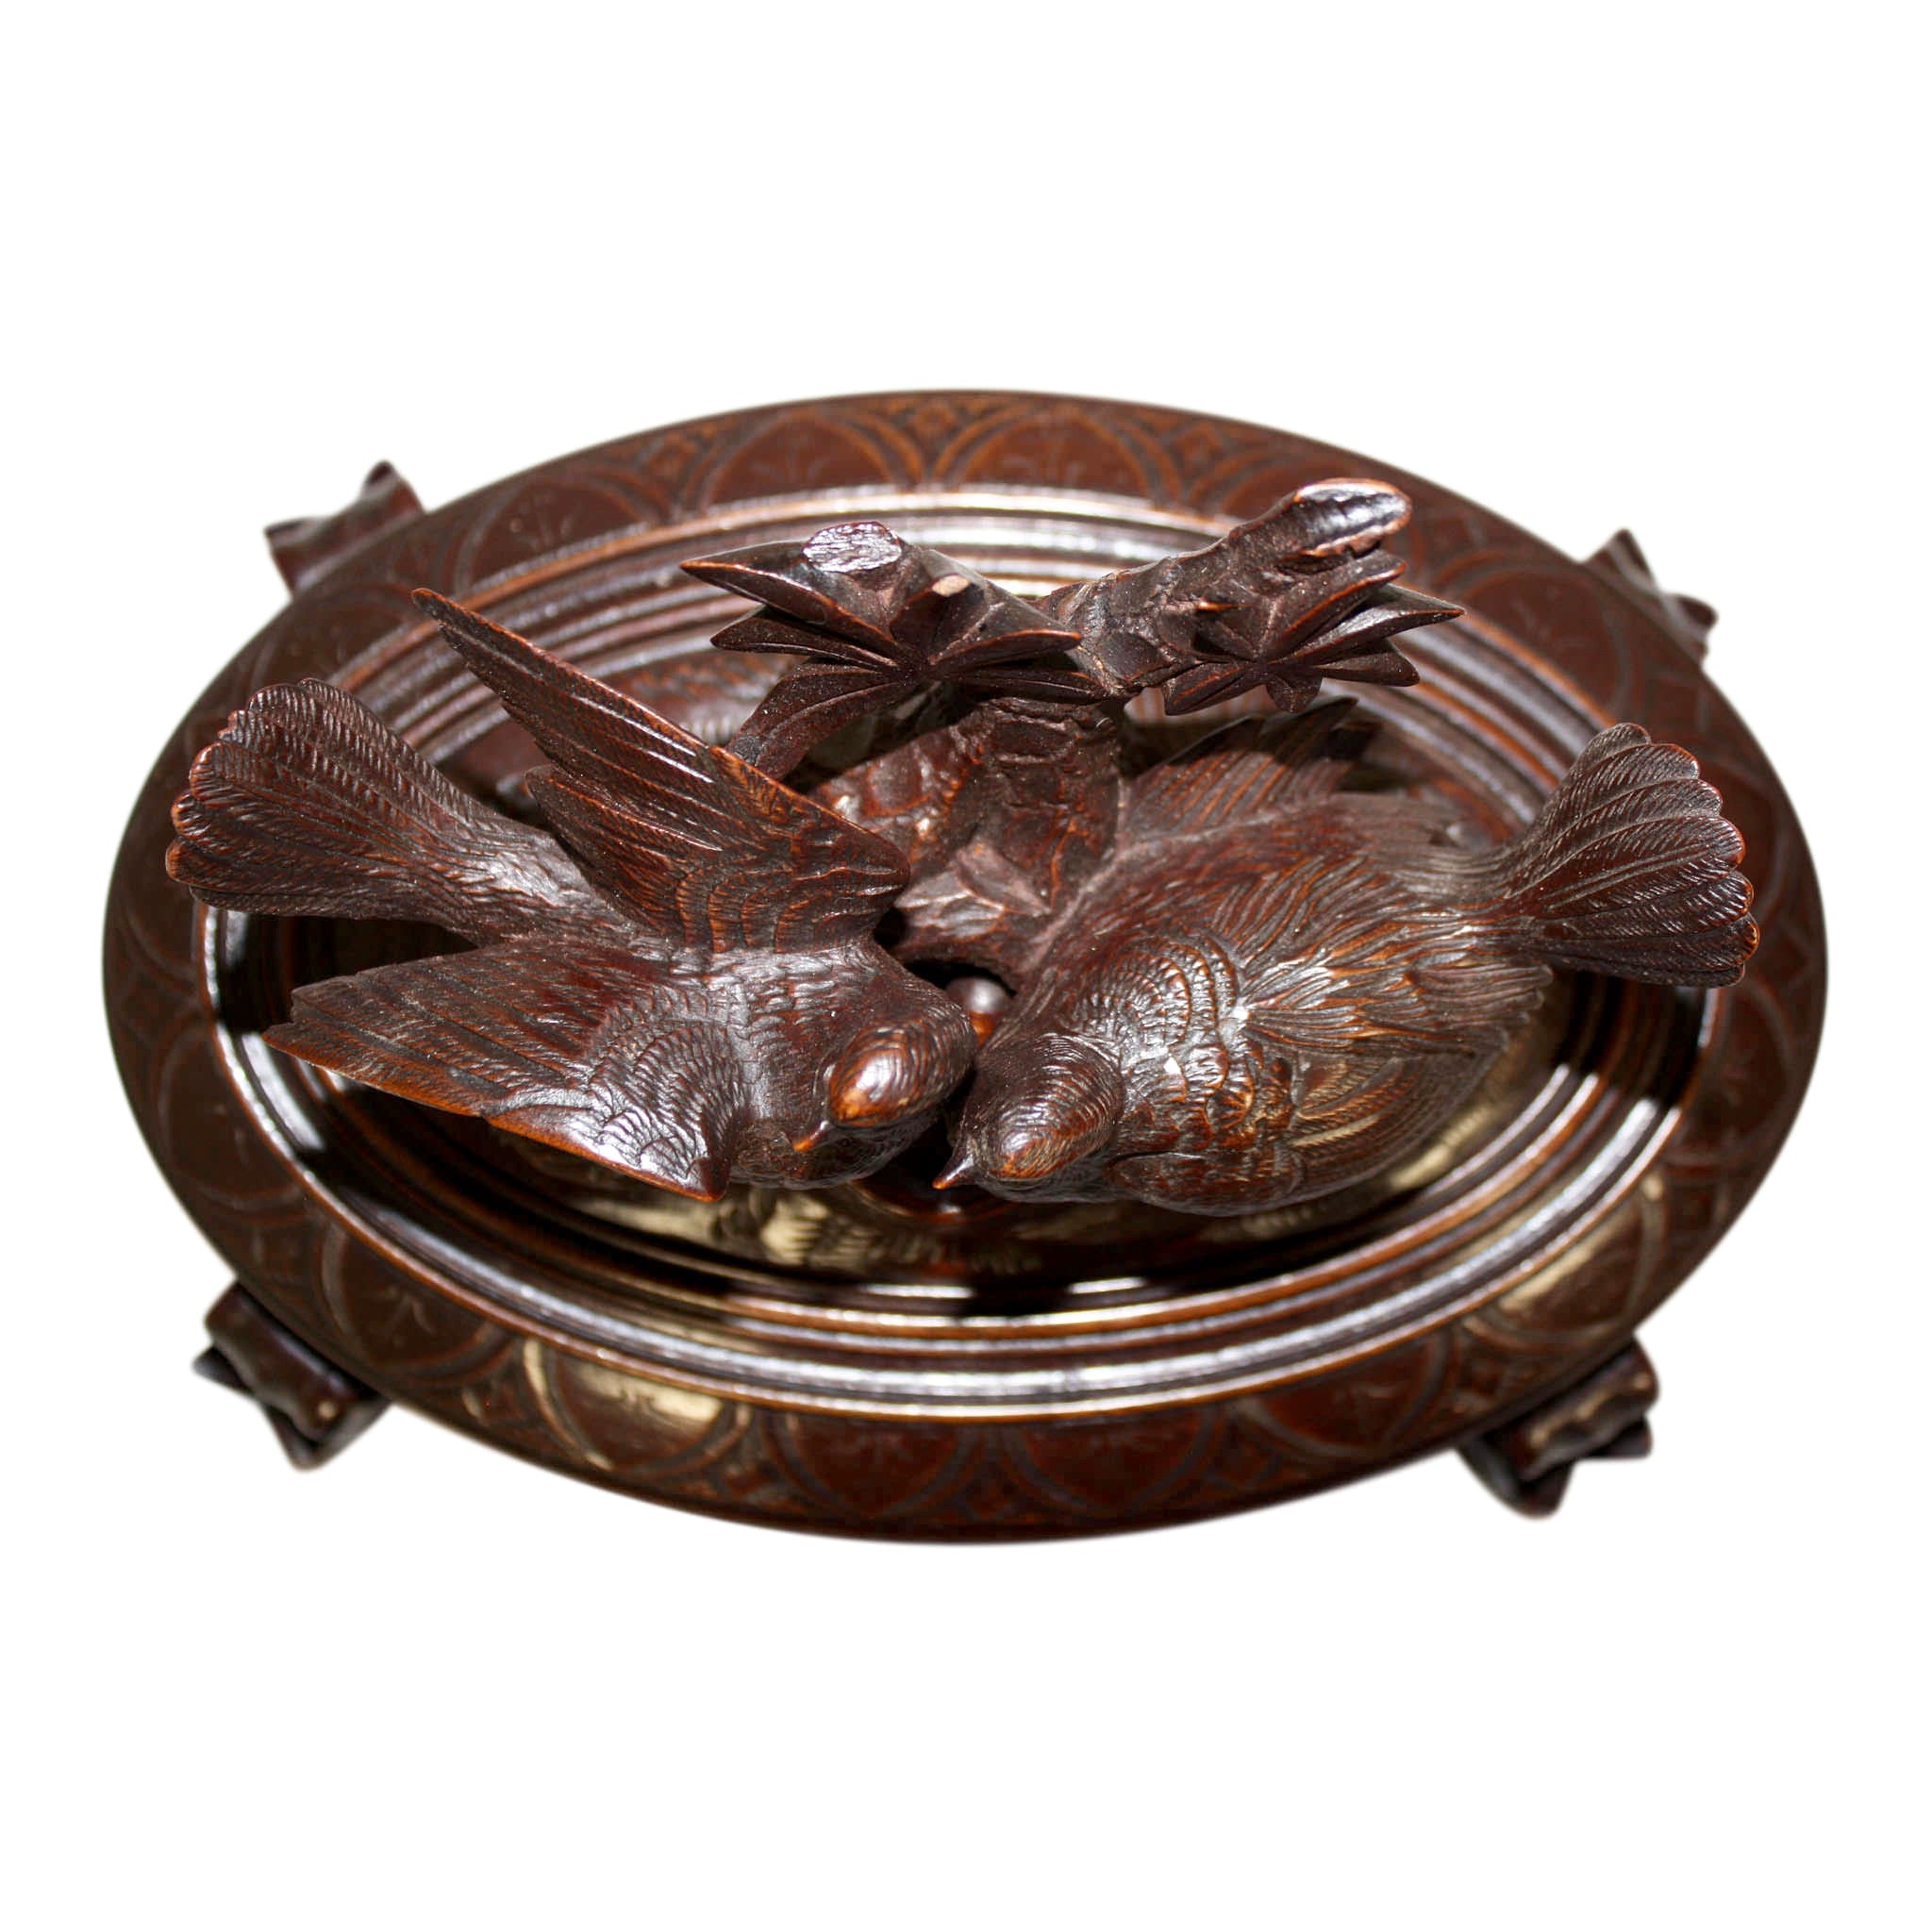 Carved Oval Jewelry Box